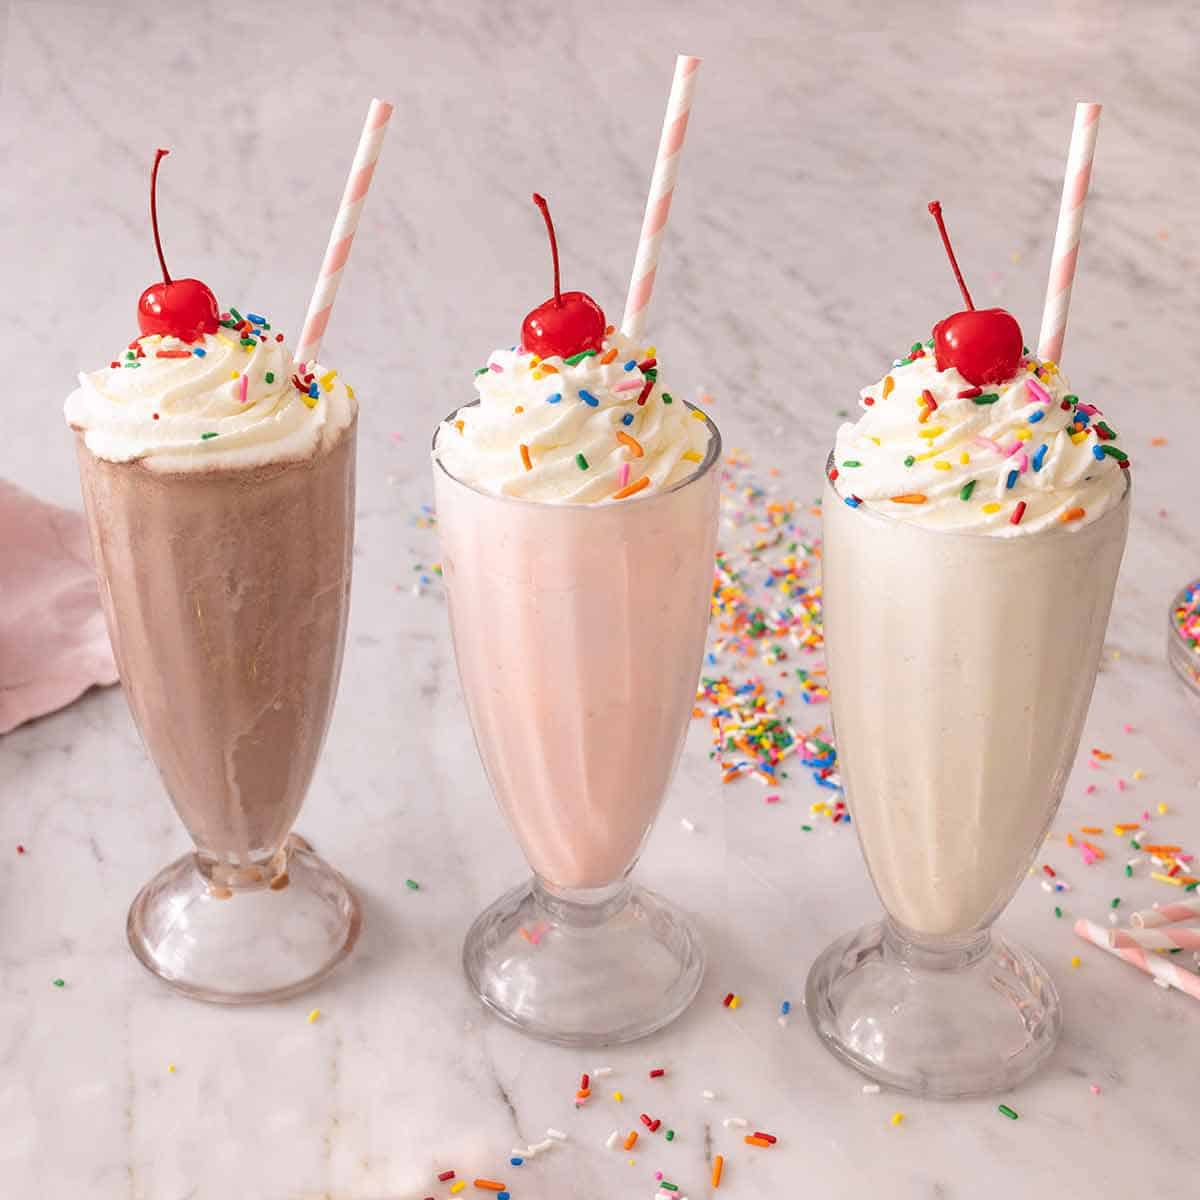 Image of a chocolate, strawberry, and vanilla milkshake with pink and white straws, whipped cream, rainbow sprinkles, and cherries on top, all in glasses atop a marble counter.